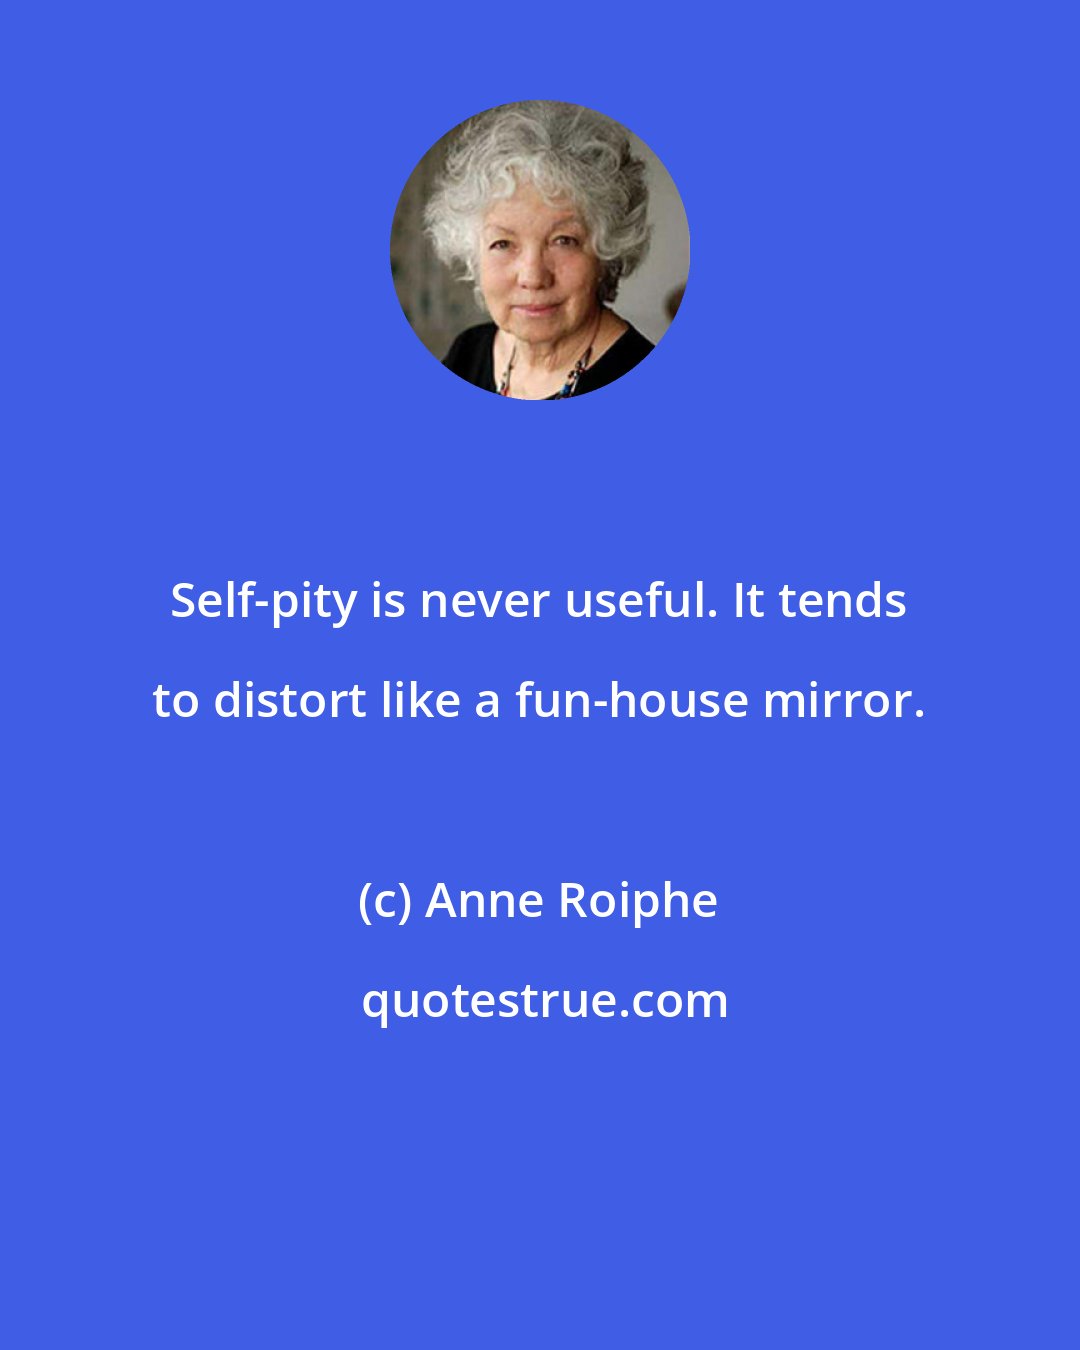 Anne Roiphe: Self-pity is never useful. It tends to distort like a fun-house mirror.